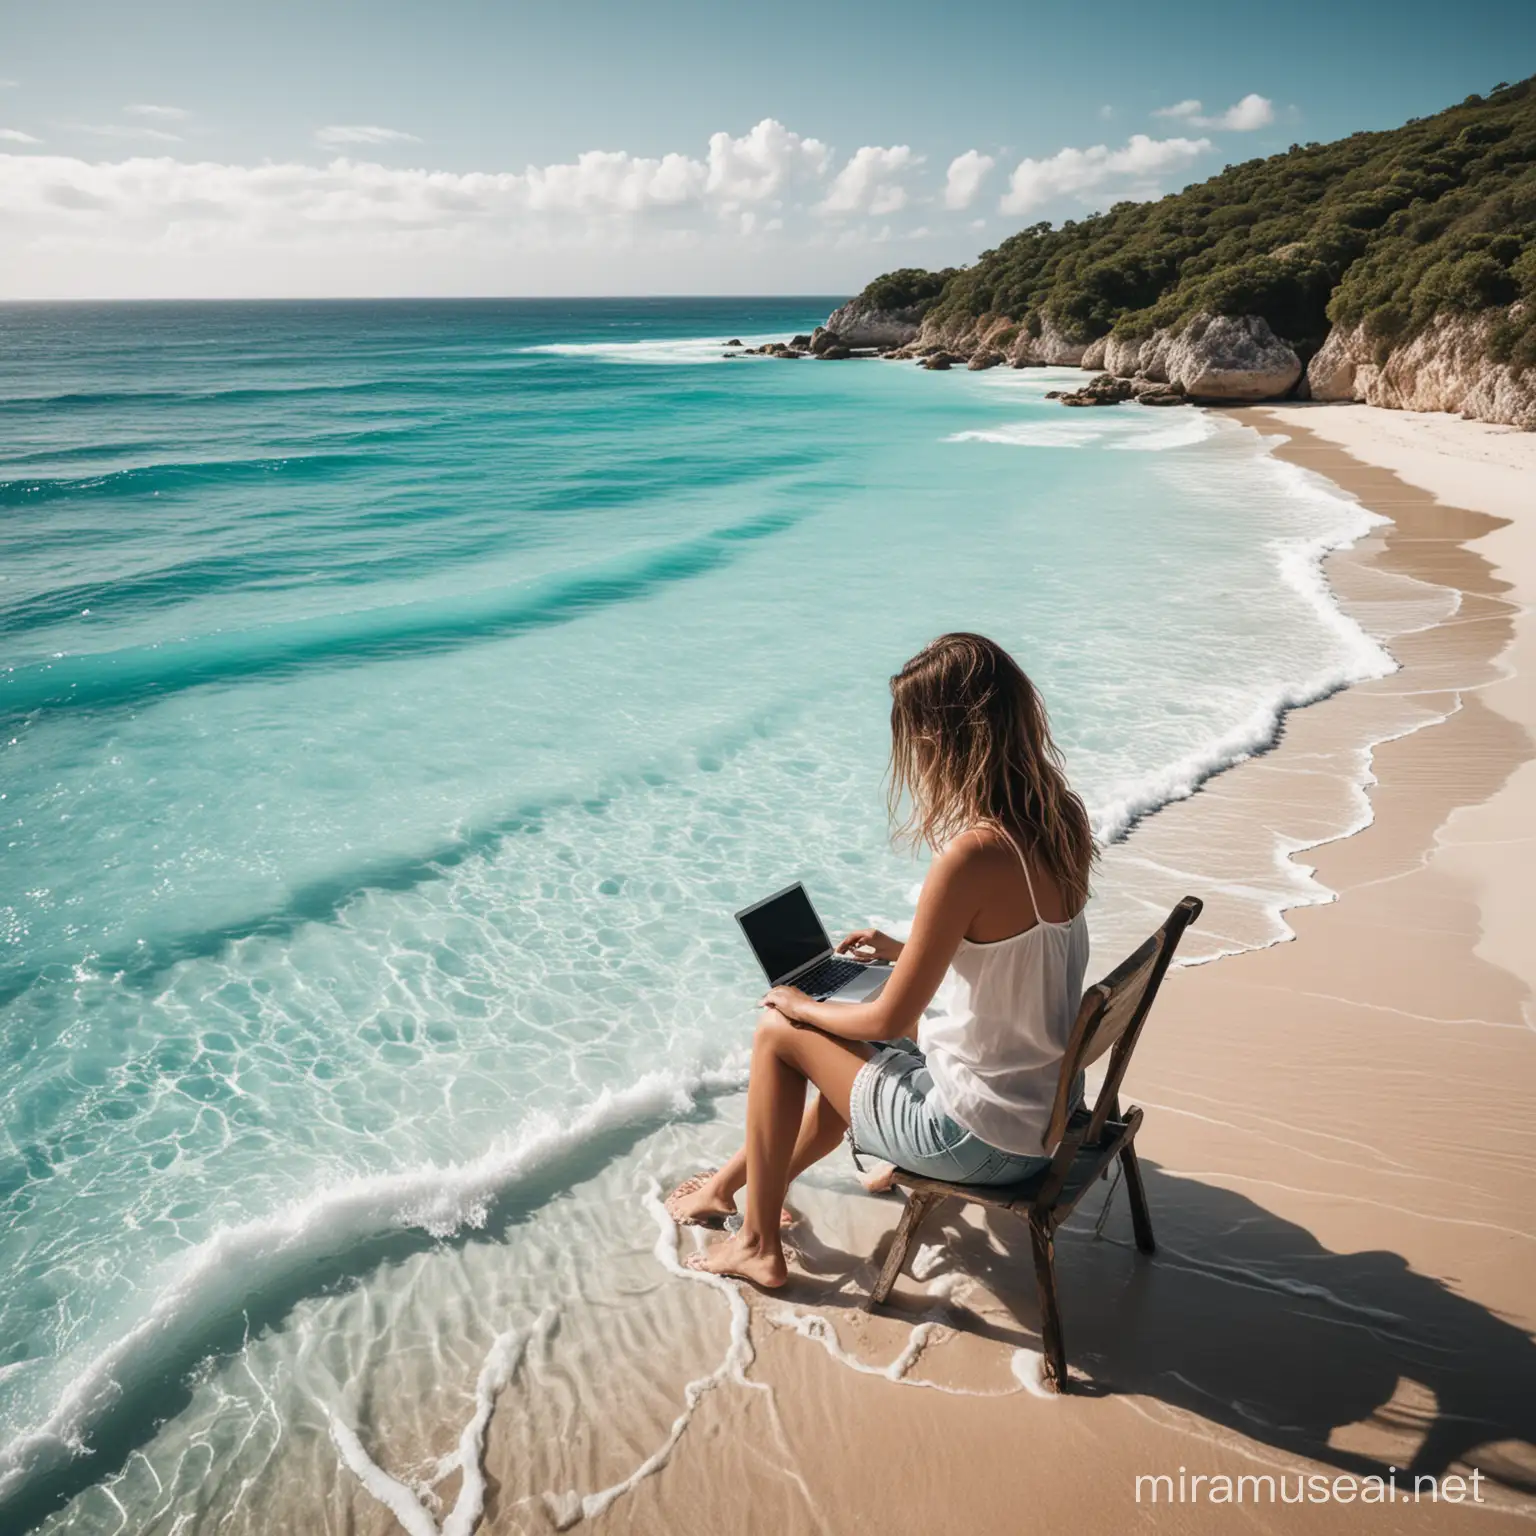 An ultra high quality photograph image of a woman looking over the ocean, working on her laptop on a beach with beautiful turquoise water